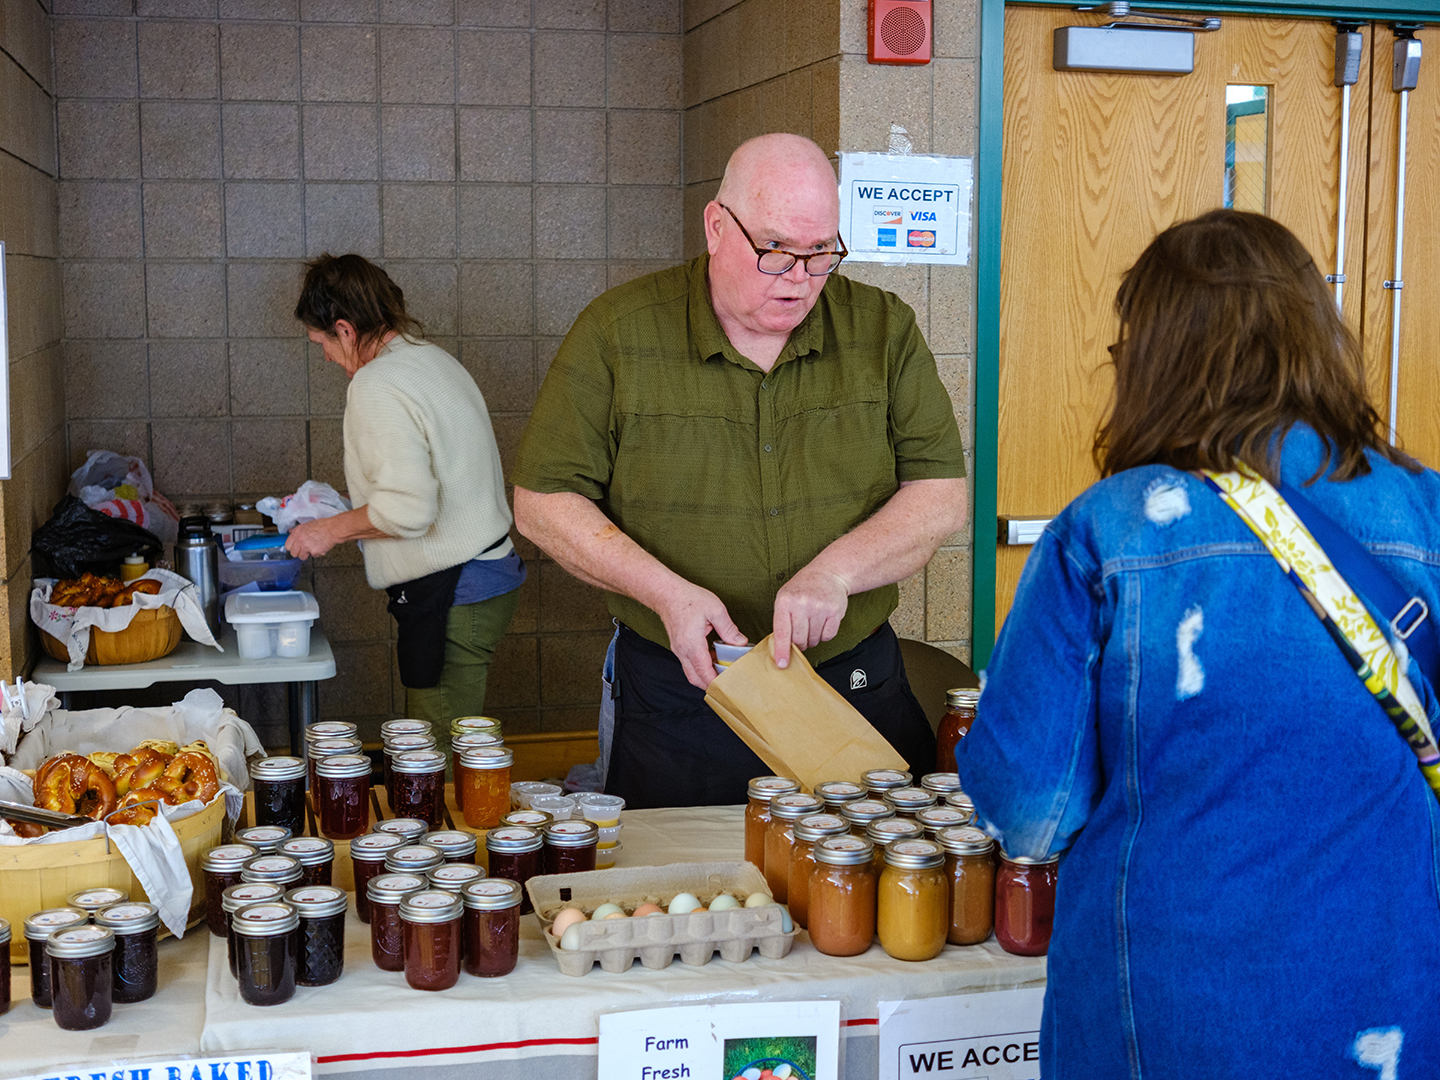 Egg and Preserves Vendor at Indoor Maple Grove Farmers Market